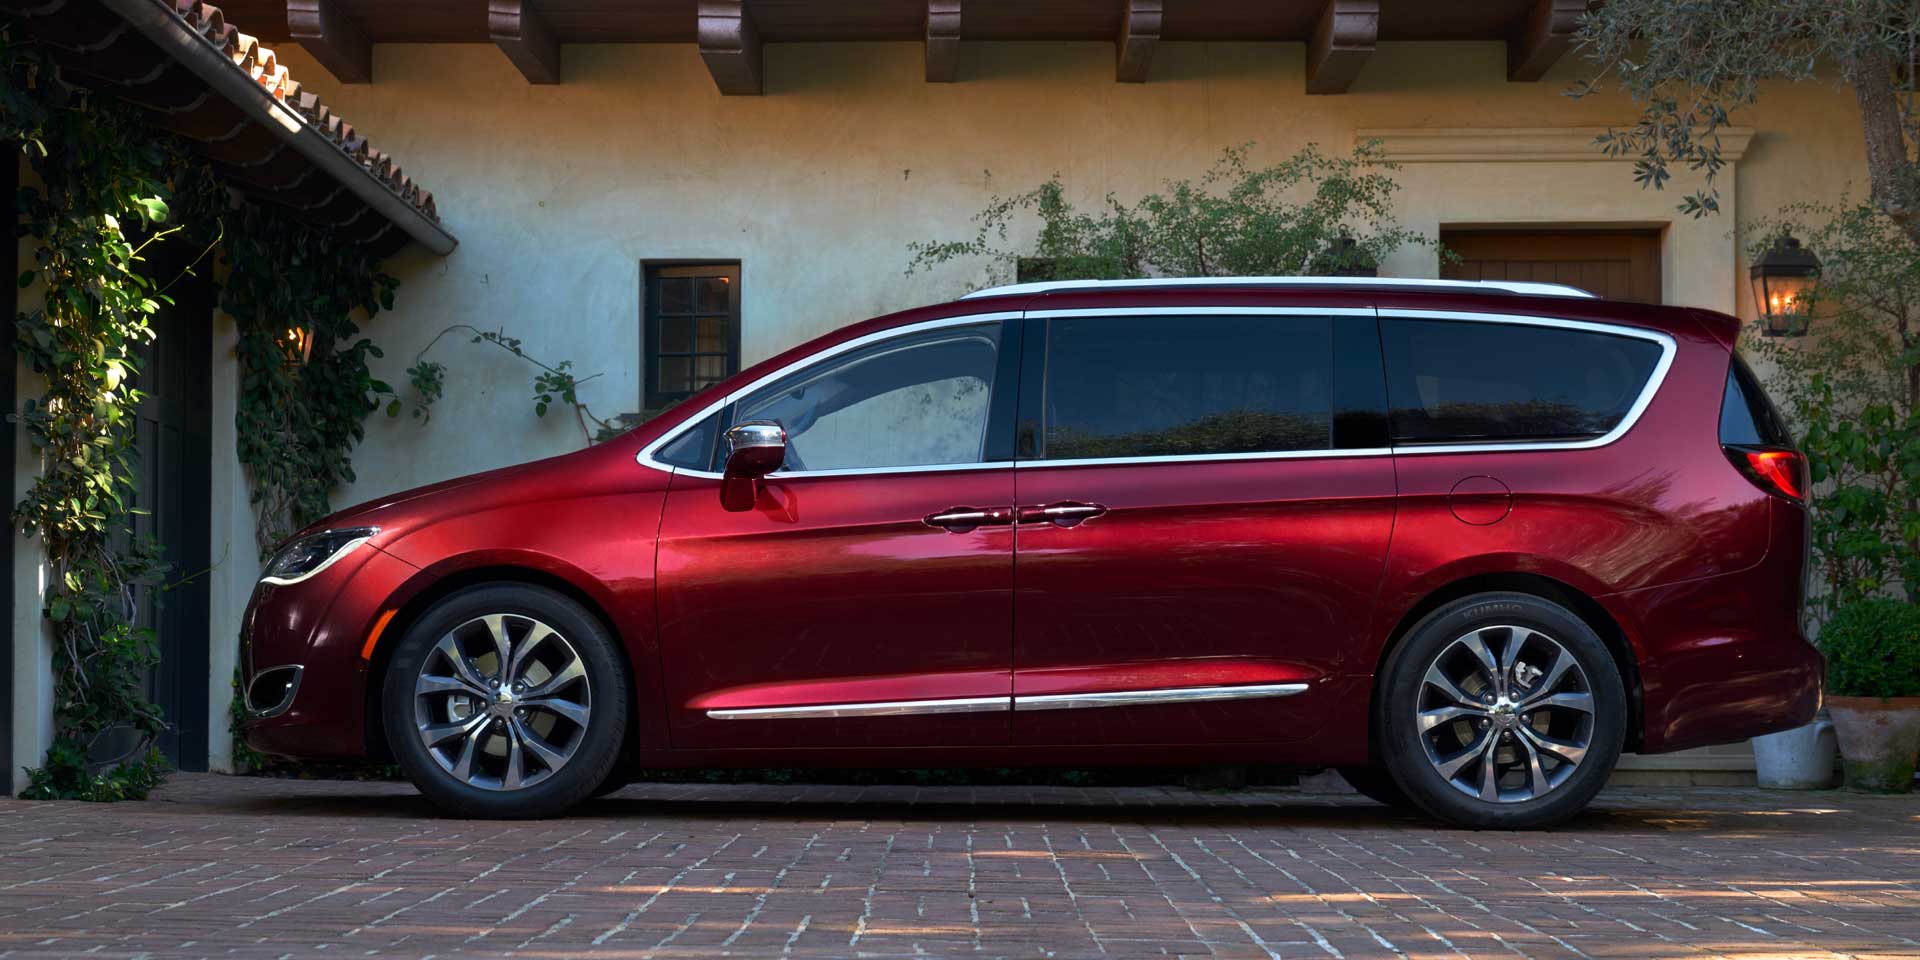 2018 Chrysler Pacifica Vehicles on Display Chicago